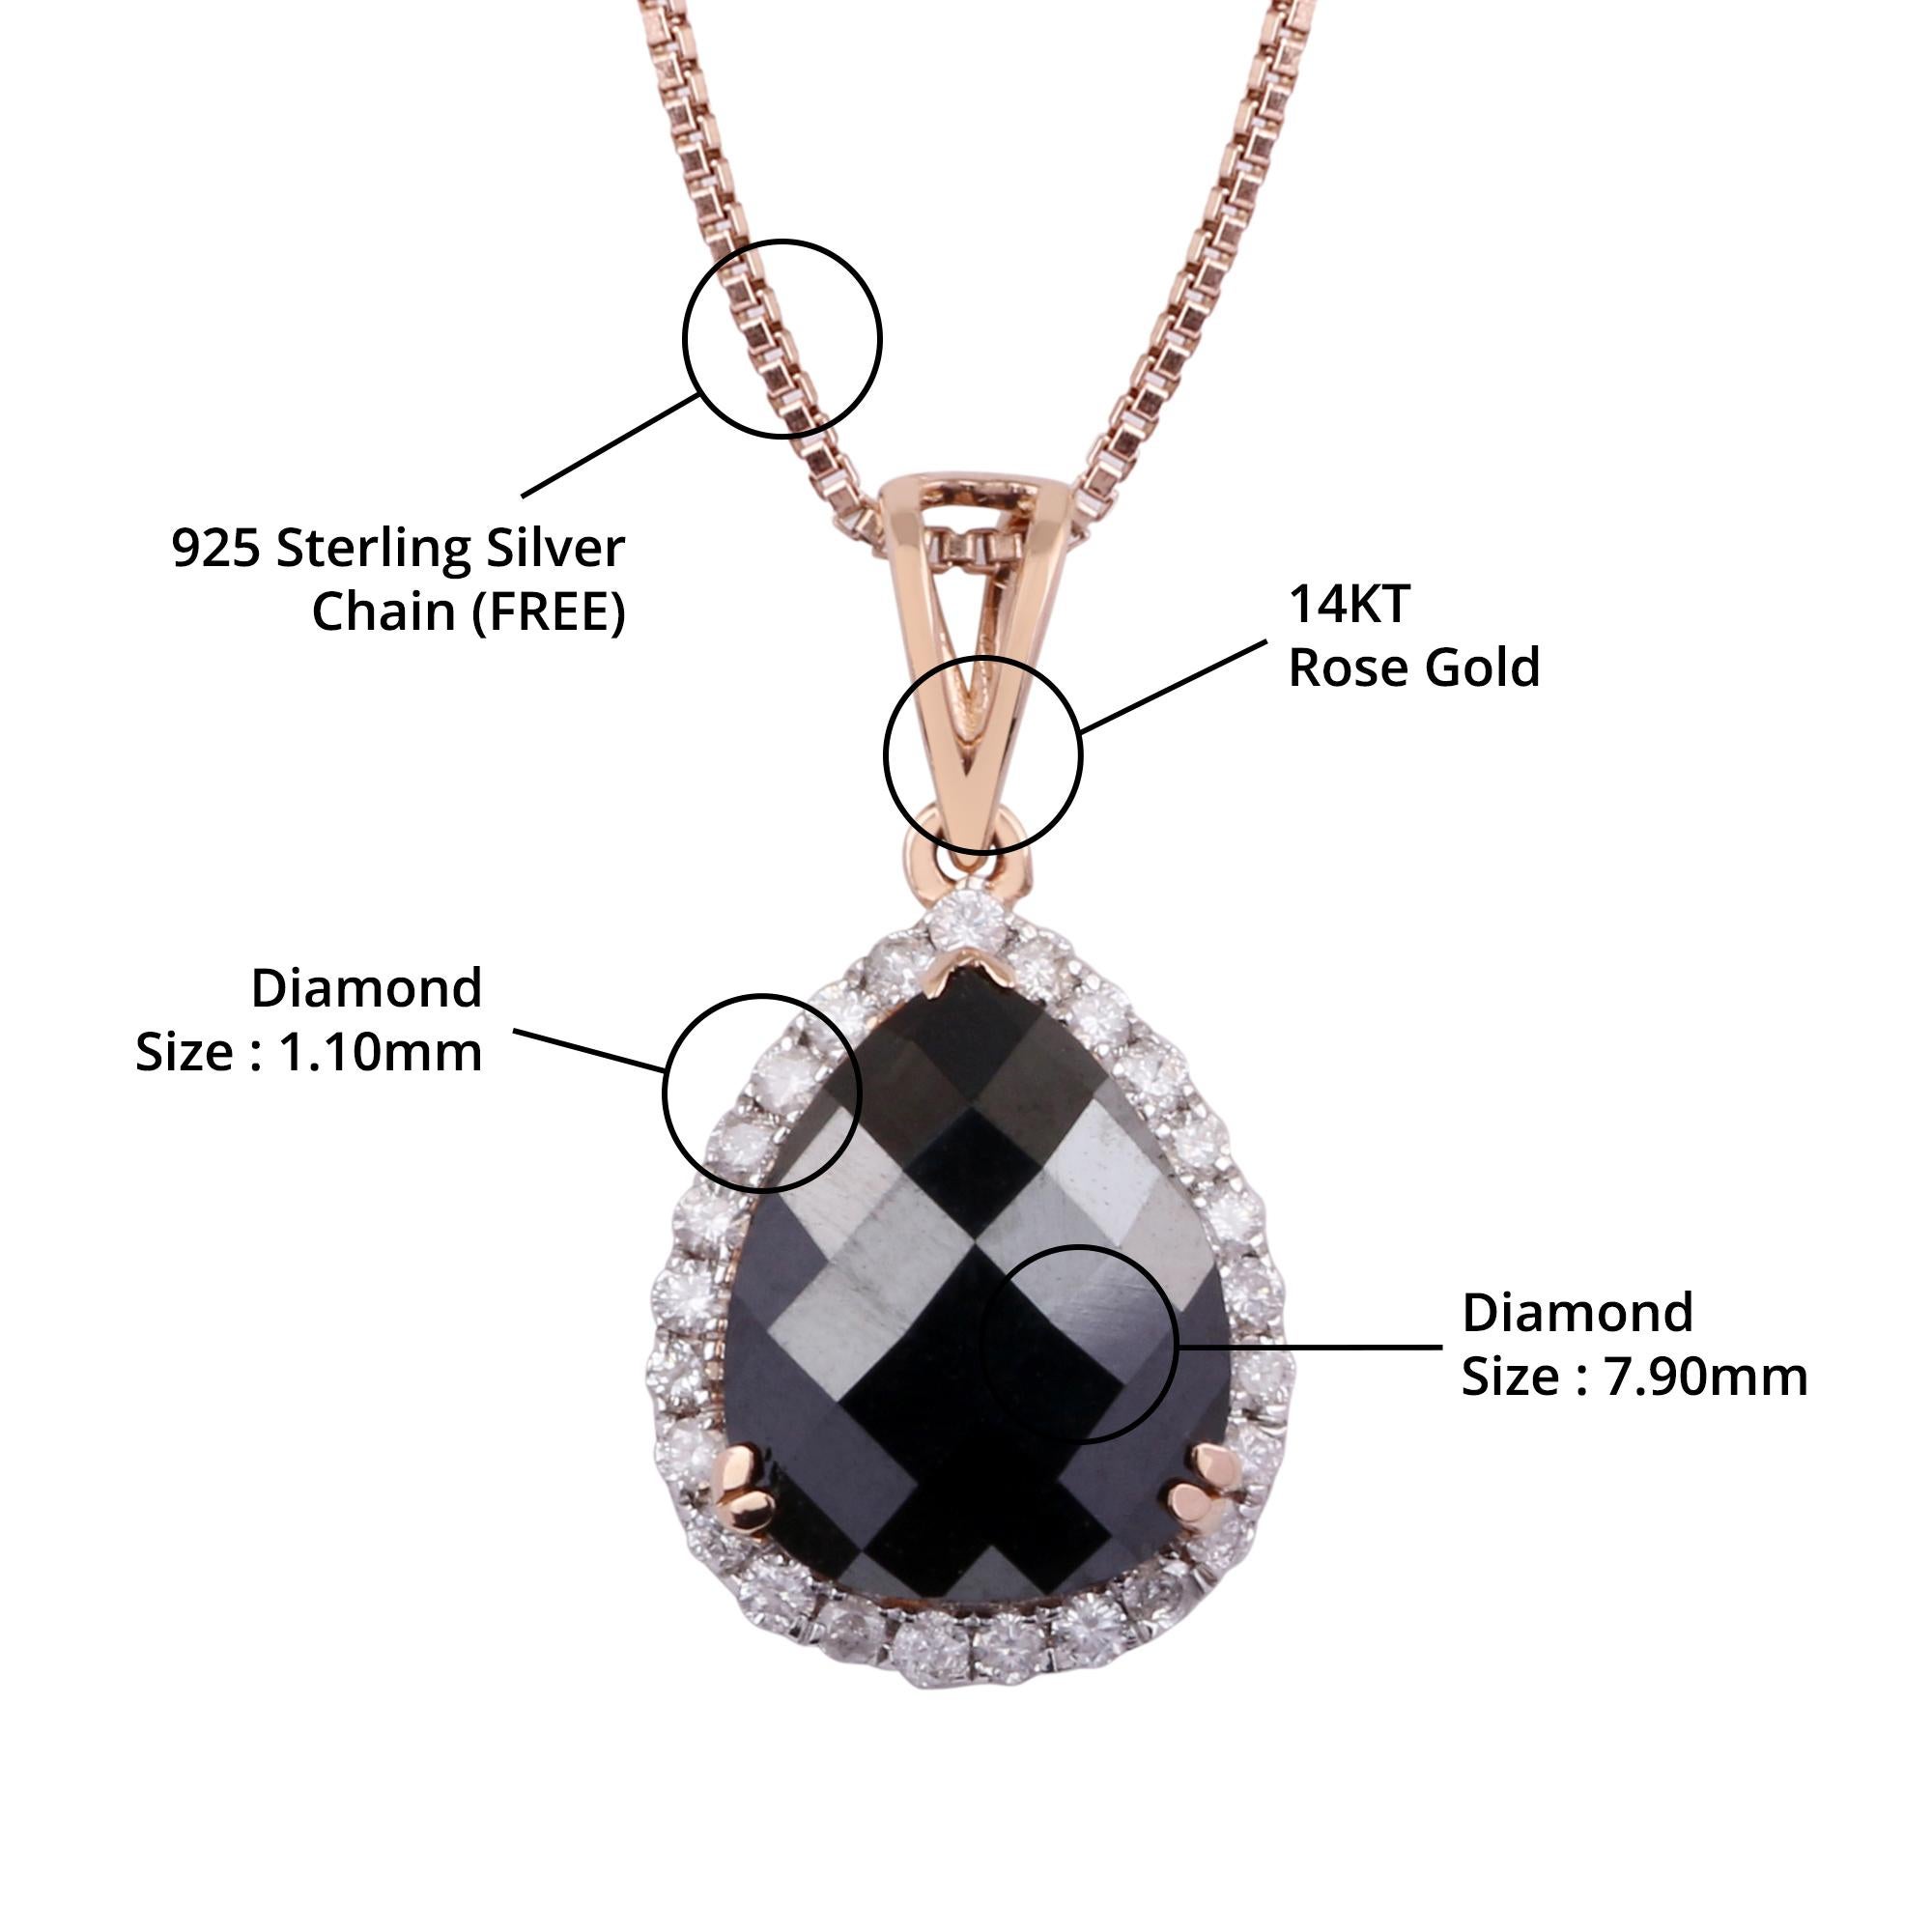 Item details:-

✦ SKU:- JPD00163RRR

✦ Material :- Gold

✦ Metal Purity : 14K Rose Gold

✦ Gemstone Specification:- 
✧ Clear Diamond Round (l1/H1) - 1.10mm - 25 Pcs
✧ Real Black Diamond - 7.90 mm - 1 Pc


✦ Approx. Diamond Carat Weight : 0.160